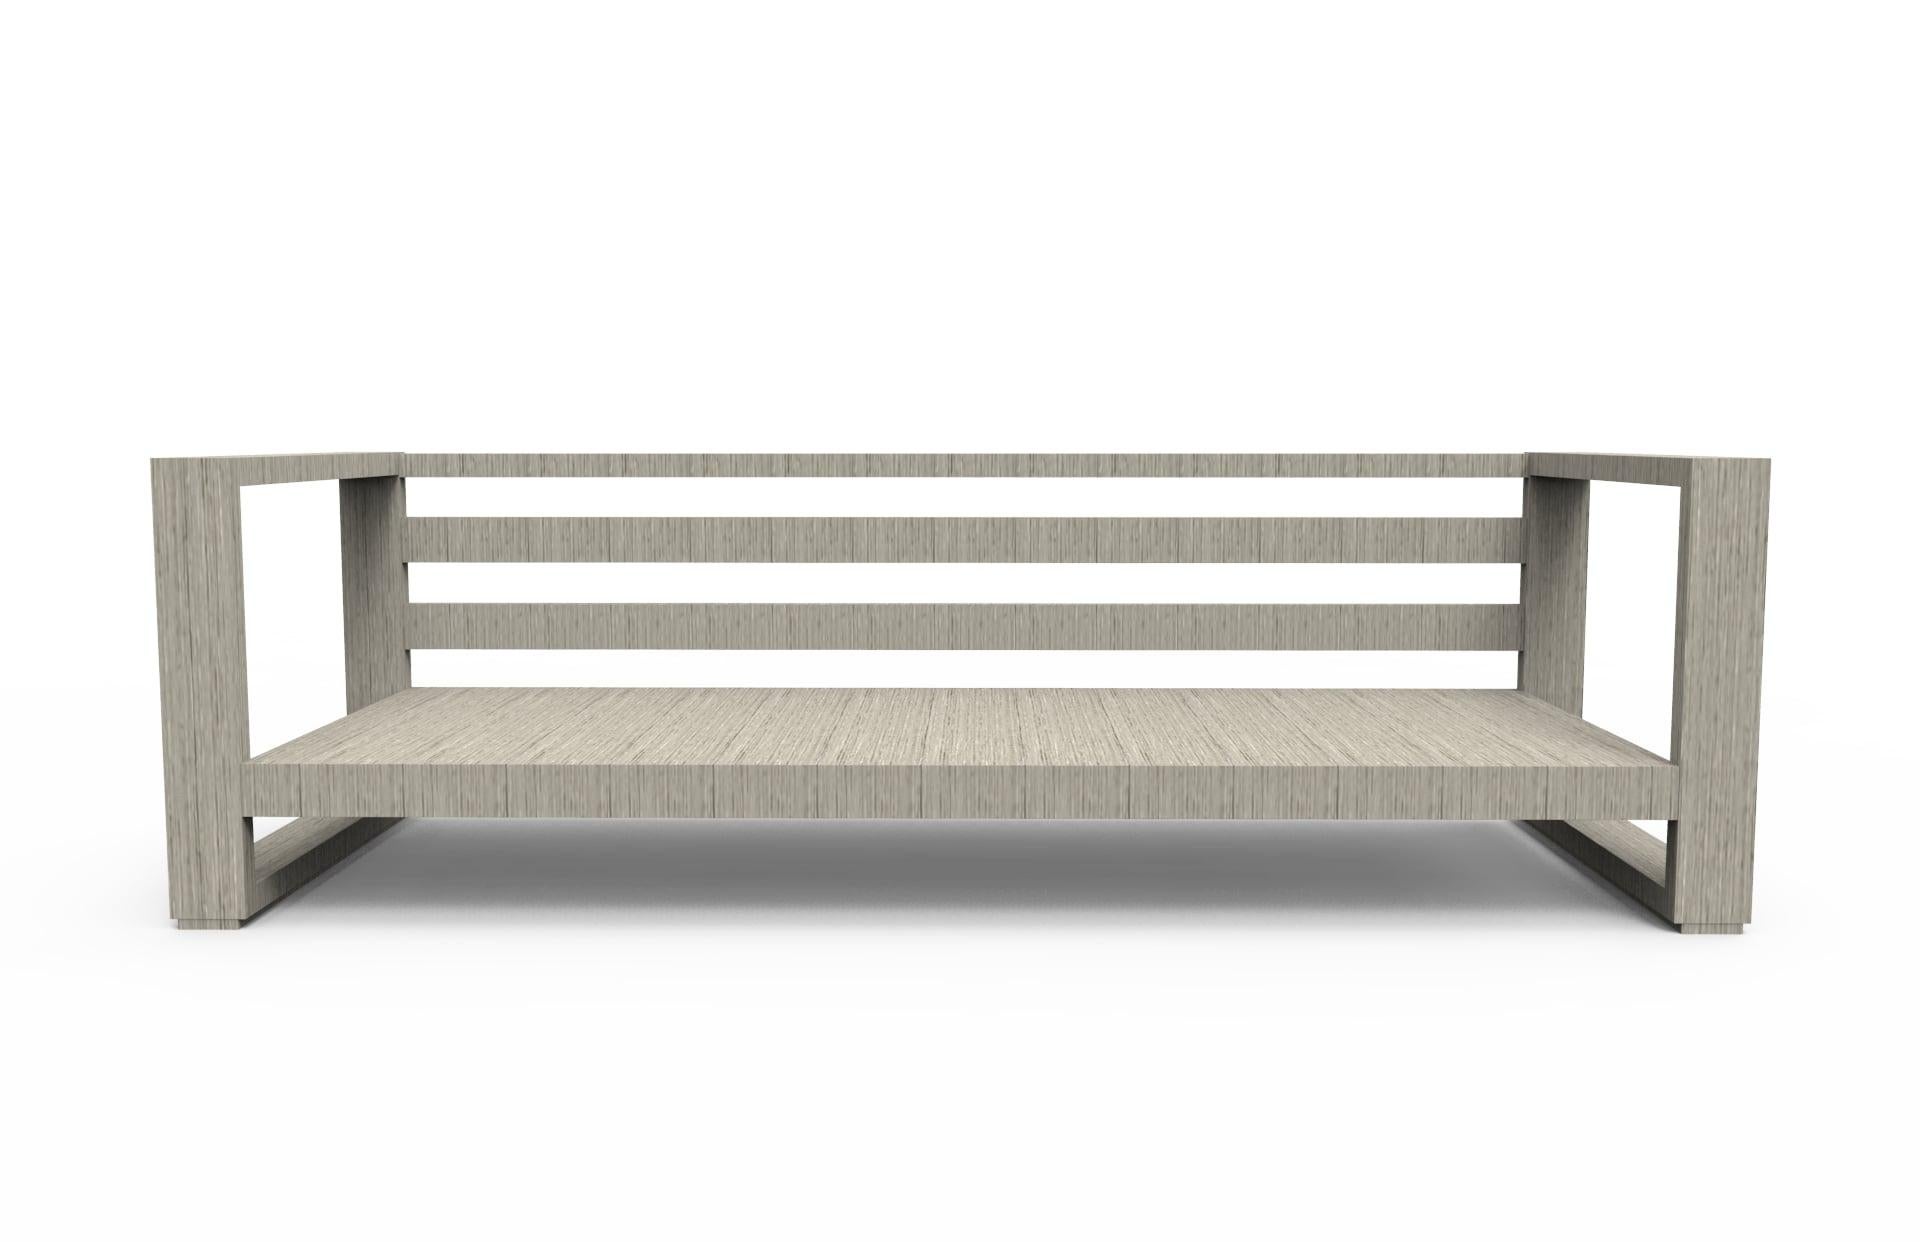 Hand-Crafted Brixton Teak Sofa 'Grade A': Wire Brushed Weathered Gray, Cabana Regatta For Sale